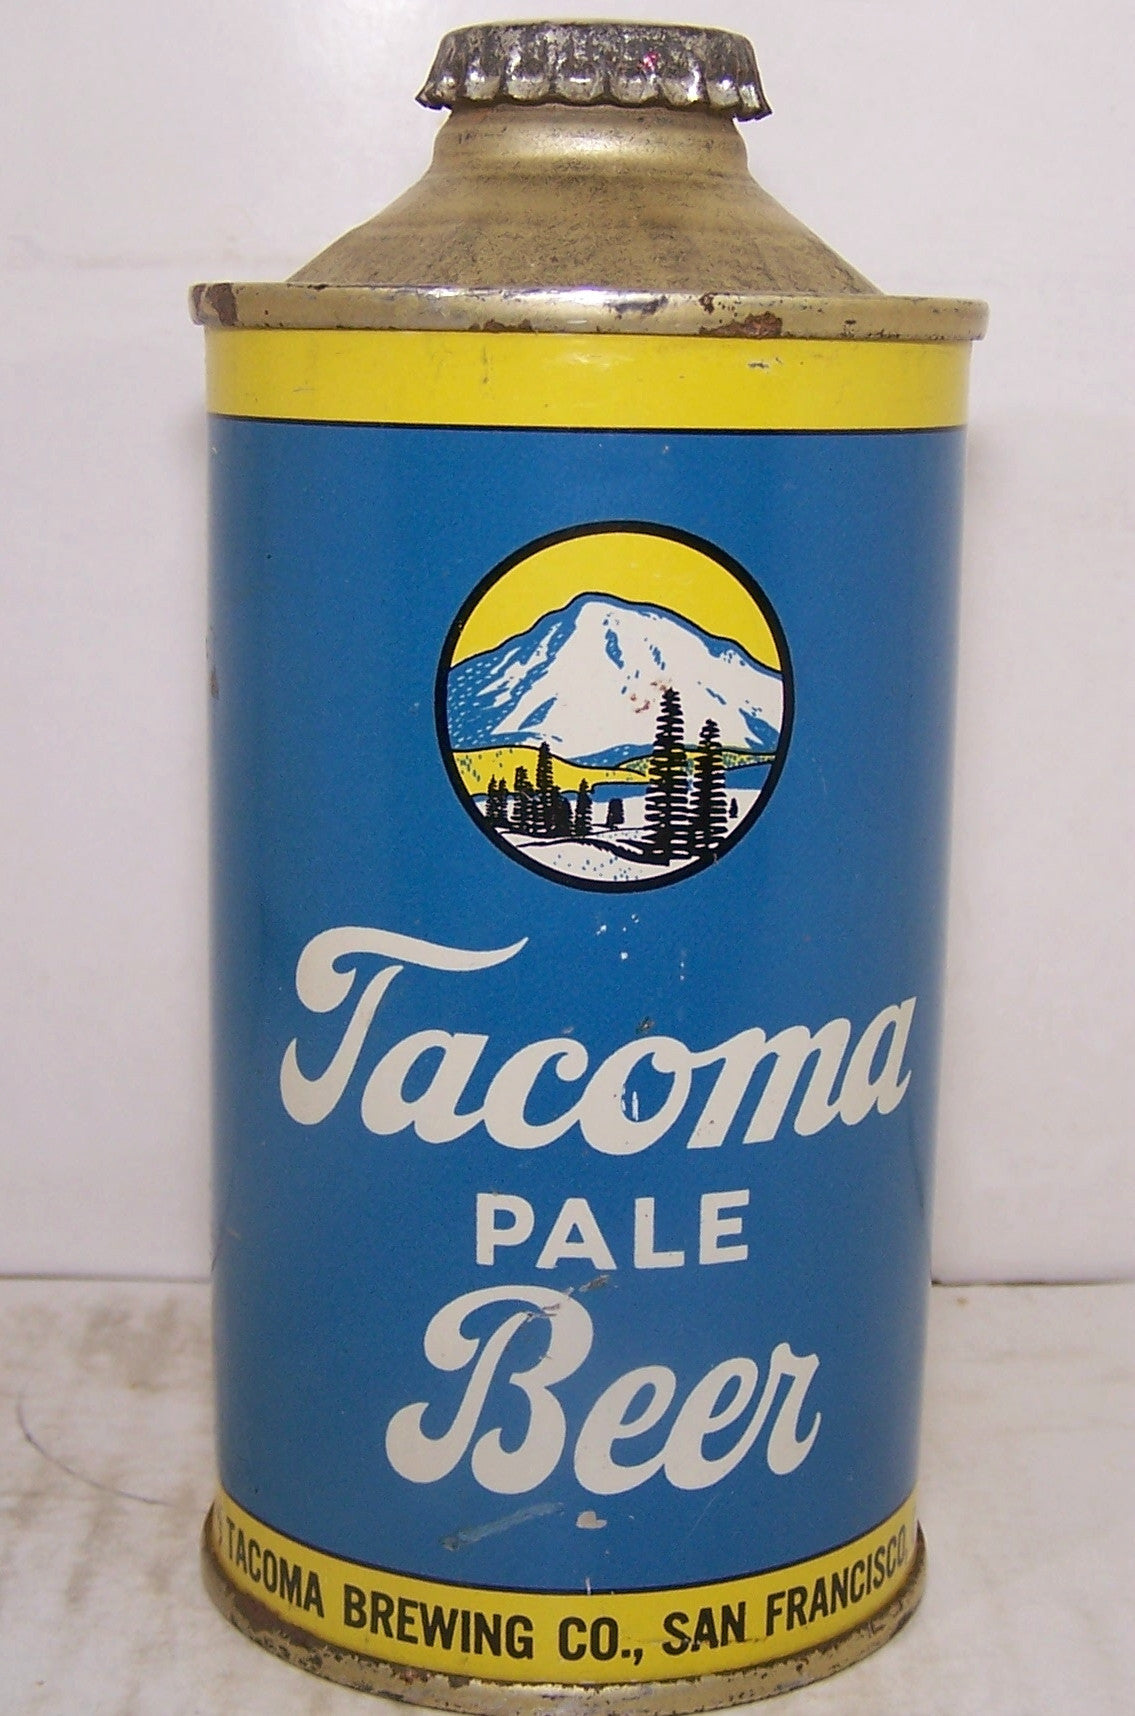 Tacoma Pale Beer, (yellow trim) USBC 186-17, Grade 1 Sold out